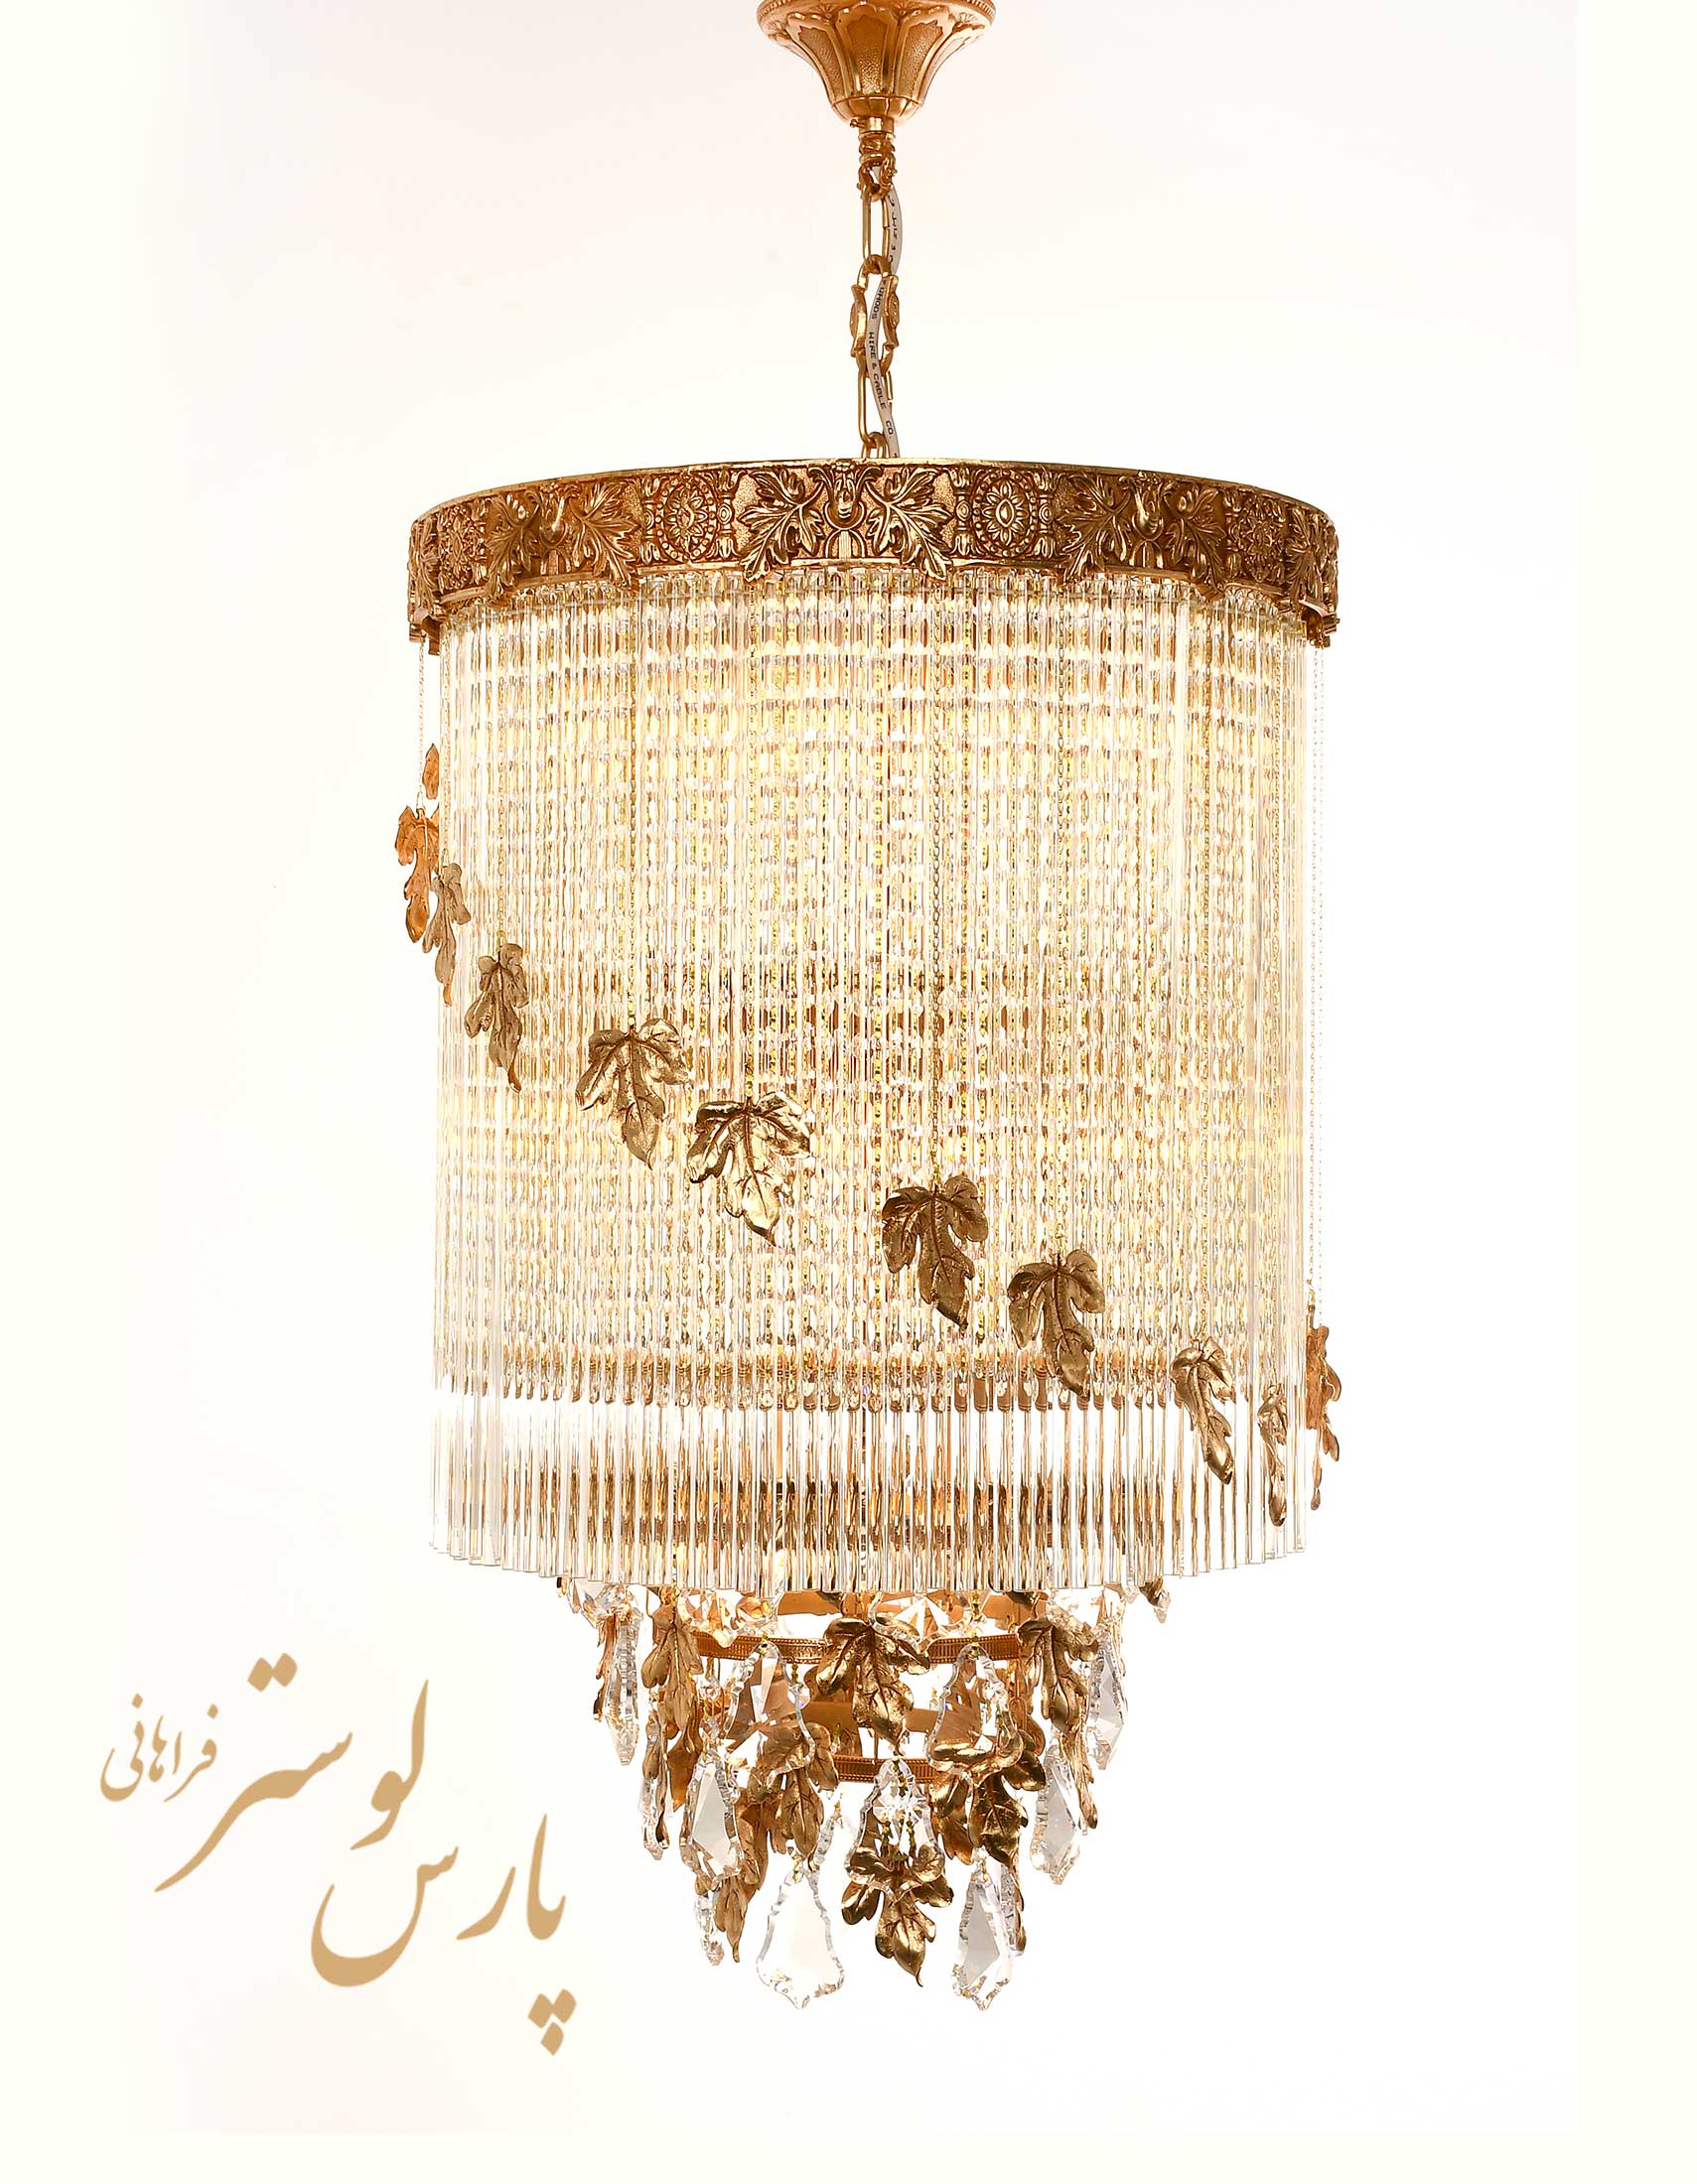 New dining Chandelier